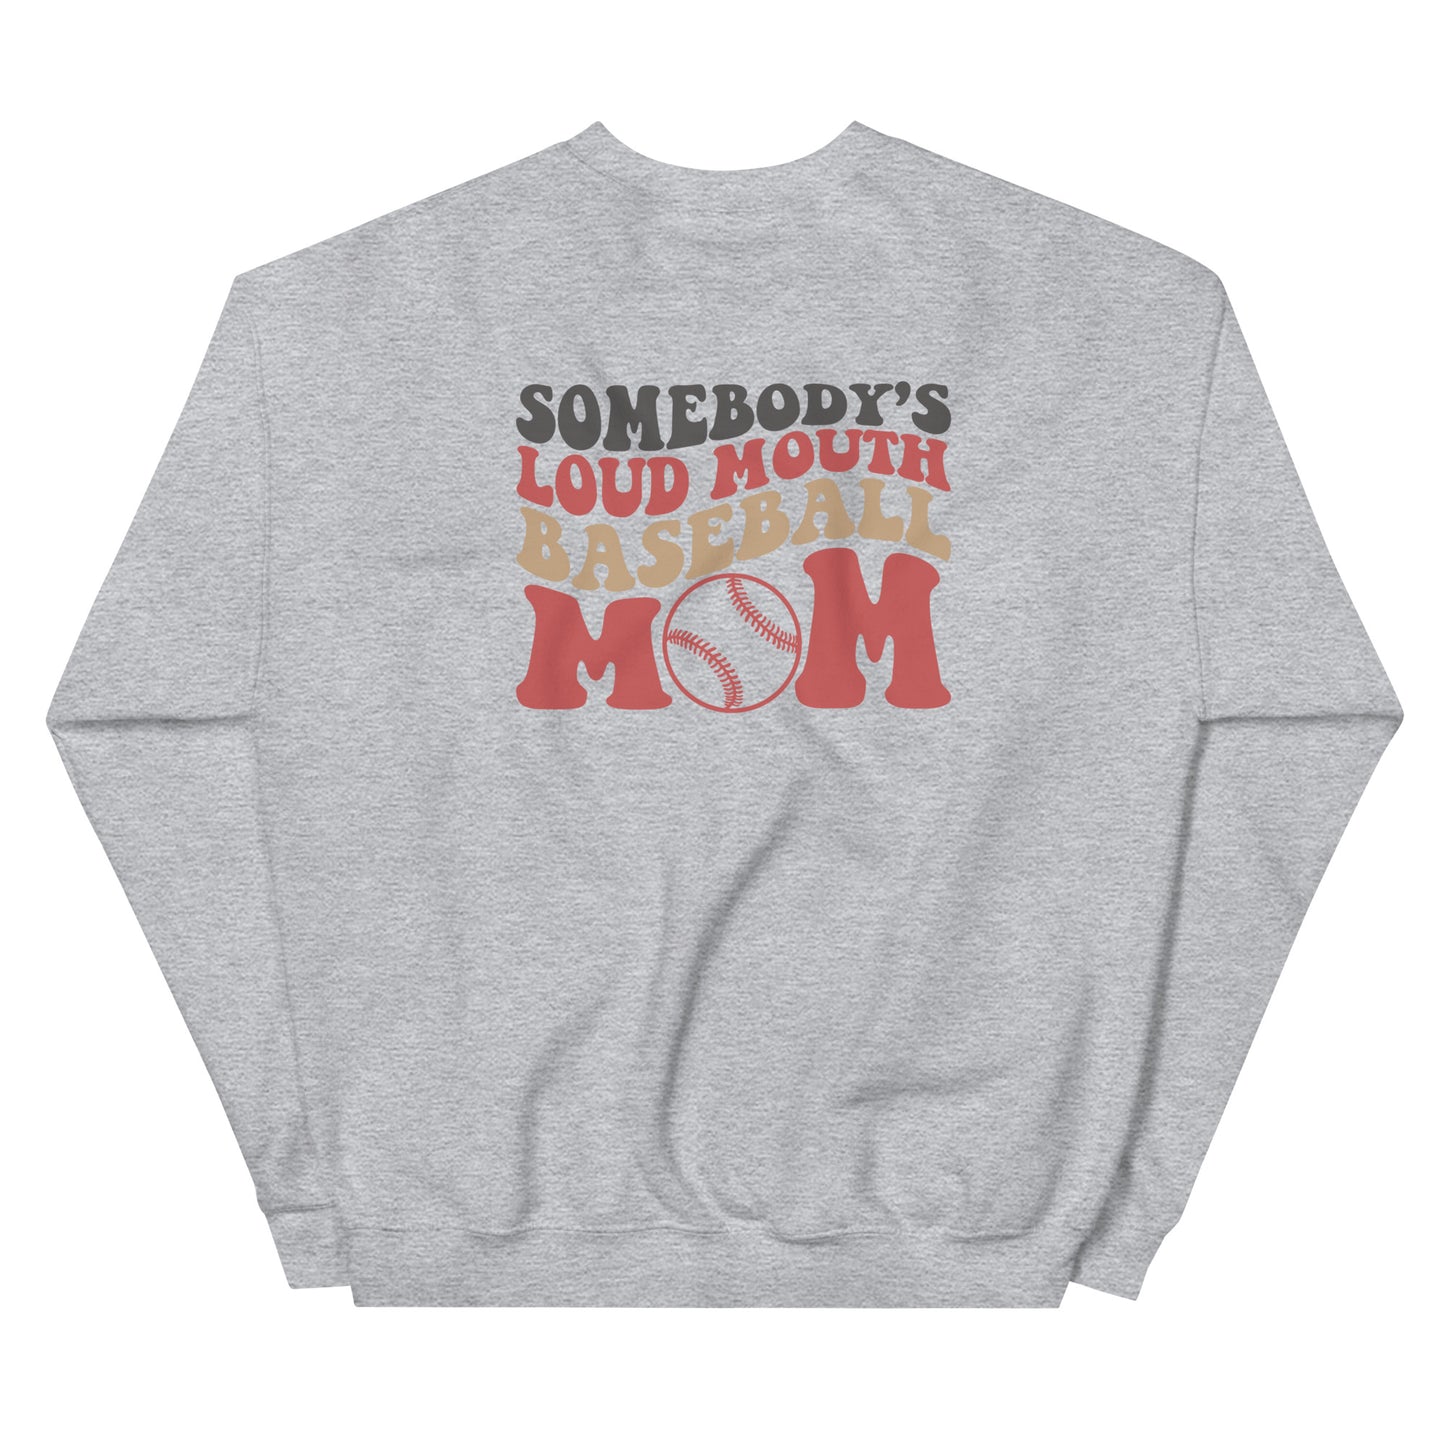 "Somebody's Loud Mouth Baseball Mom" Sweatshirt: Cozy Comfort Meets Game-Day Style!